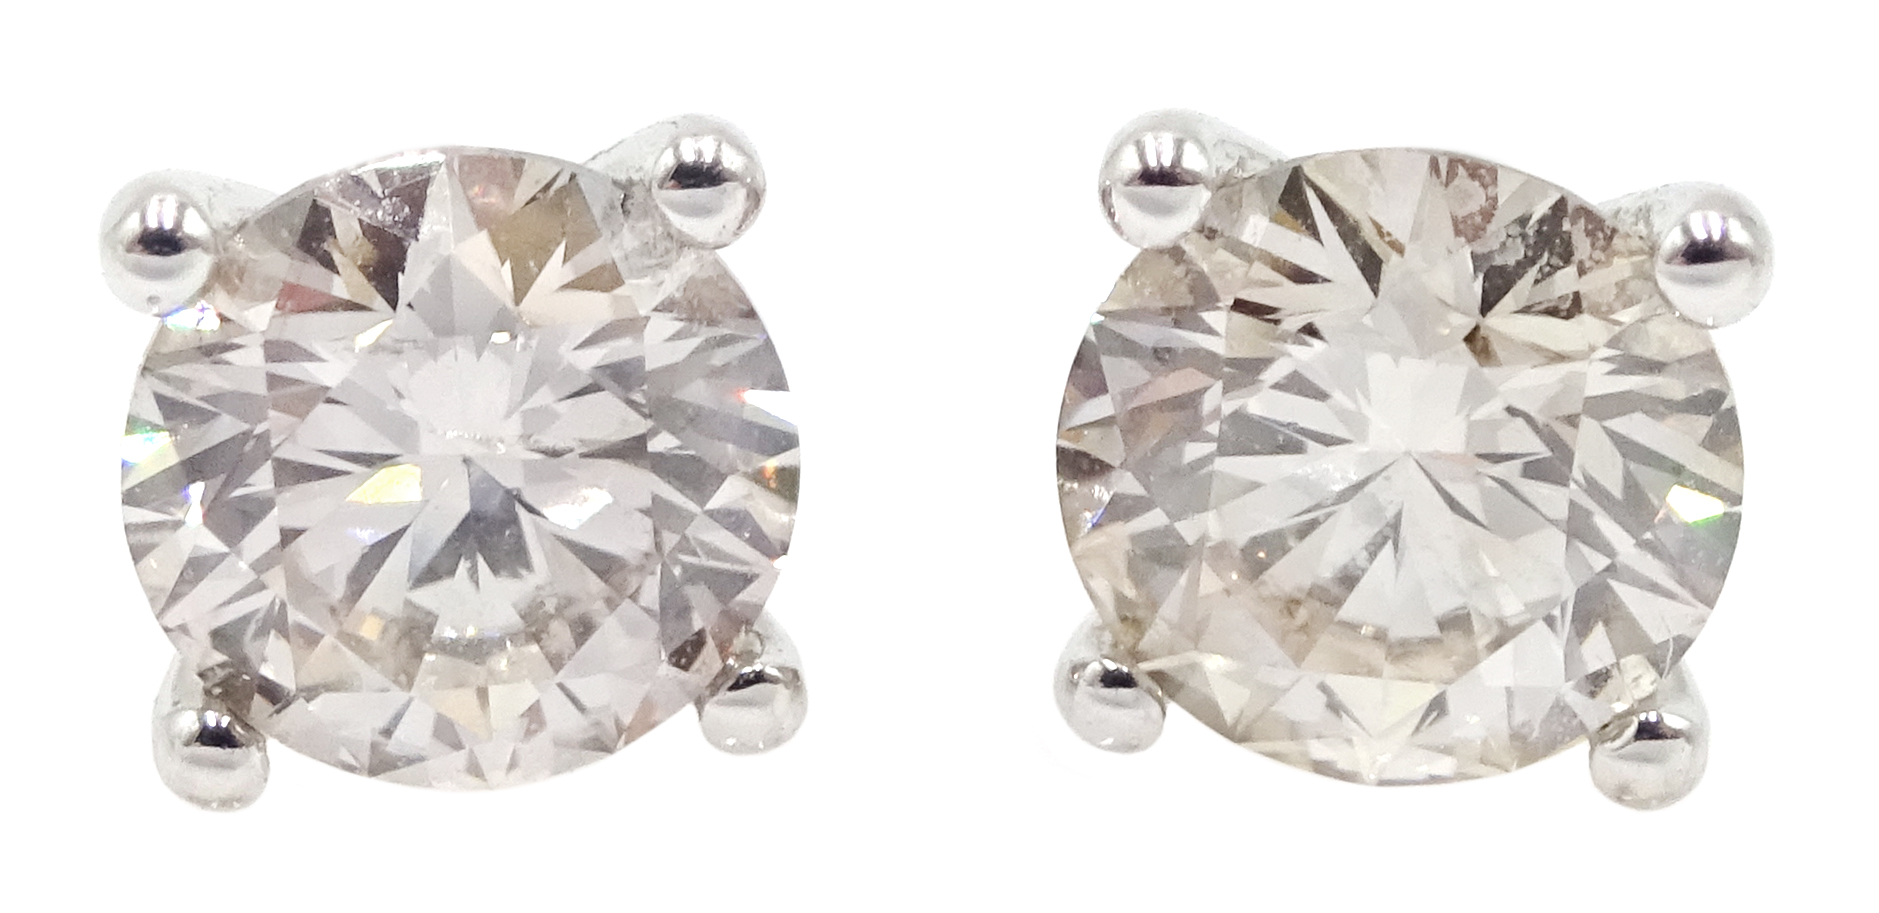 18ct white gold four claw solitaire diamond stud earrings, diamond total weight approx 1.00 carat